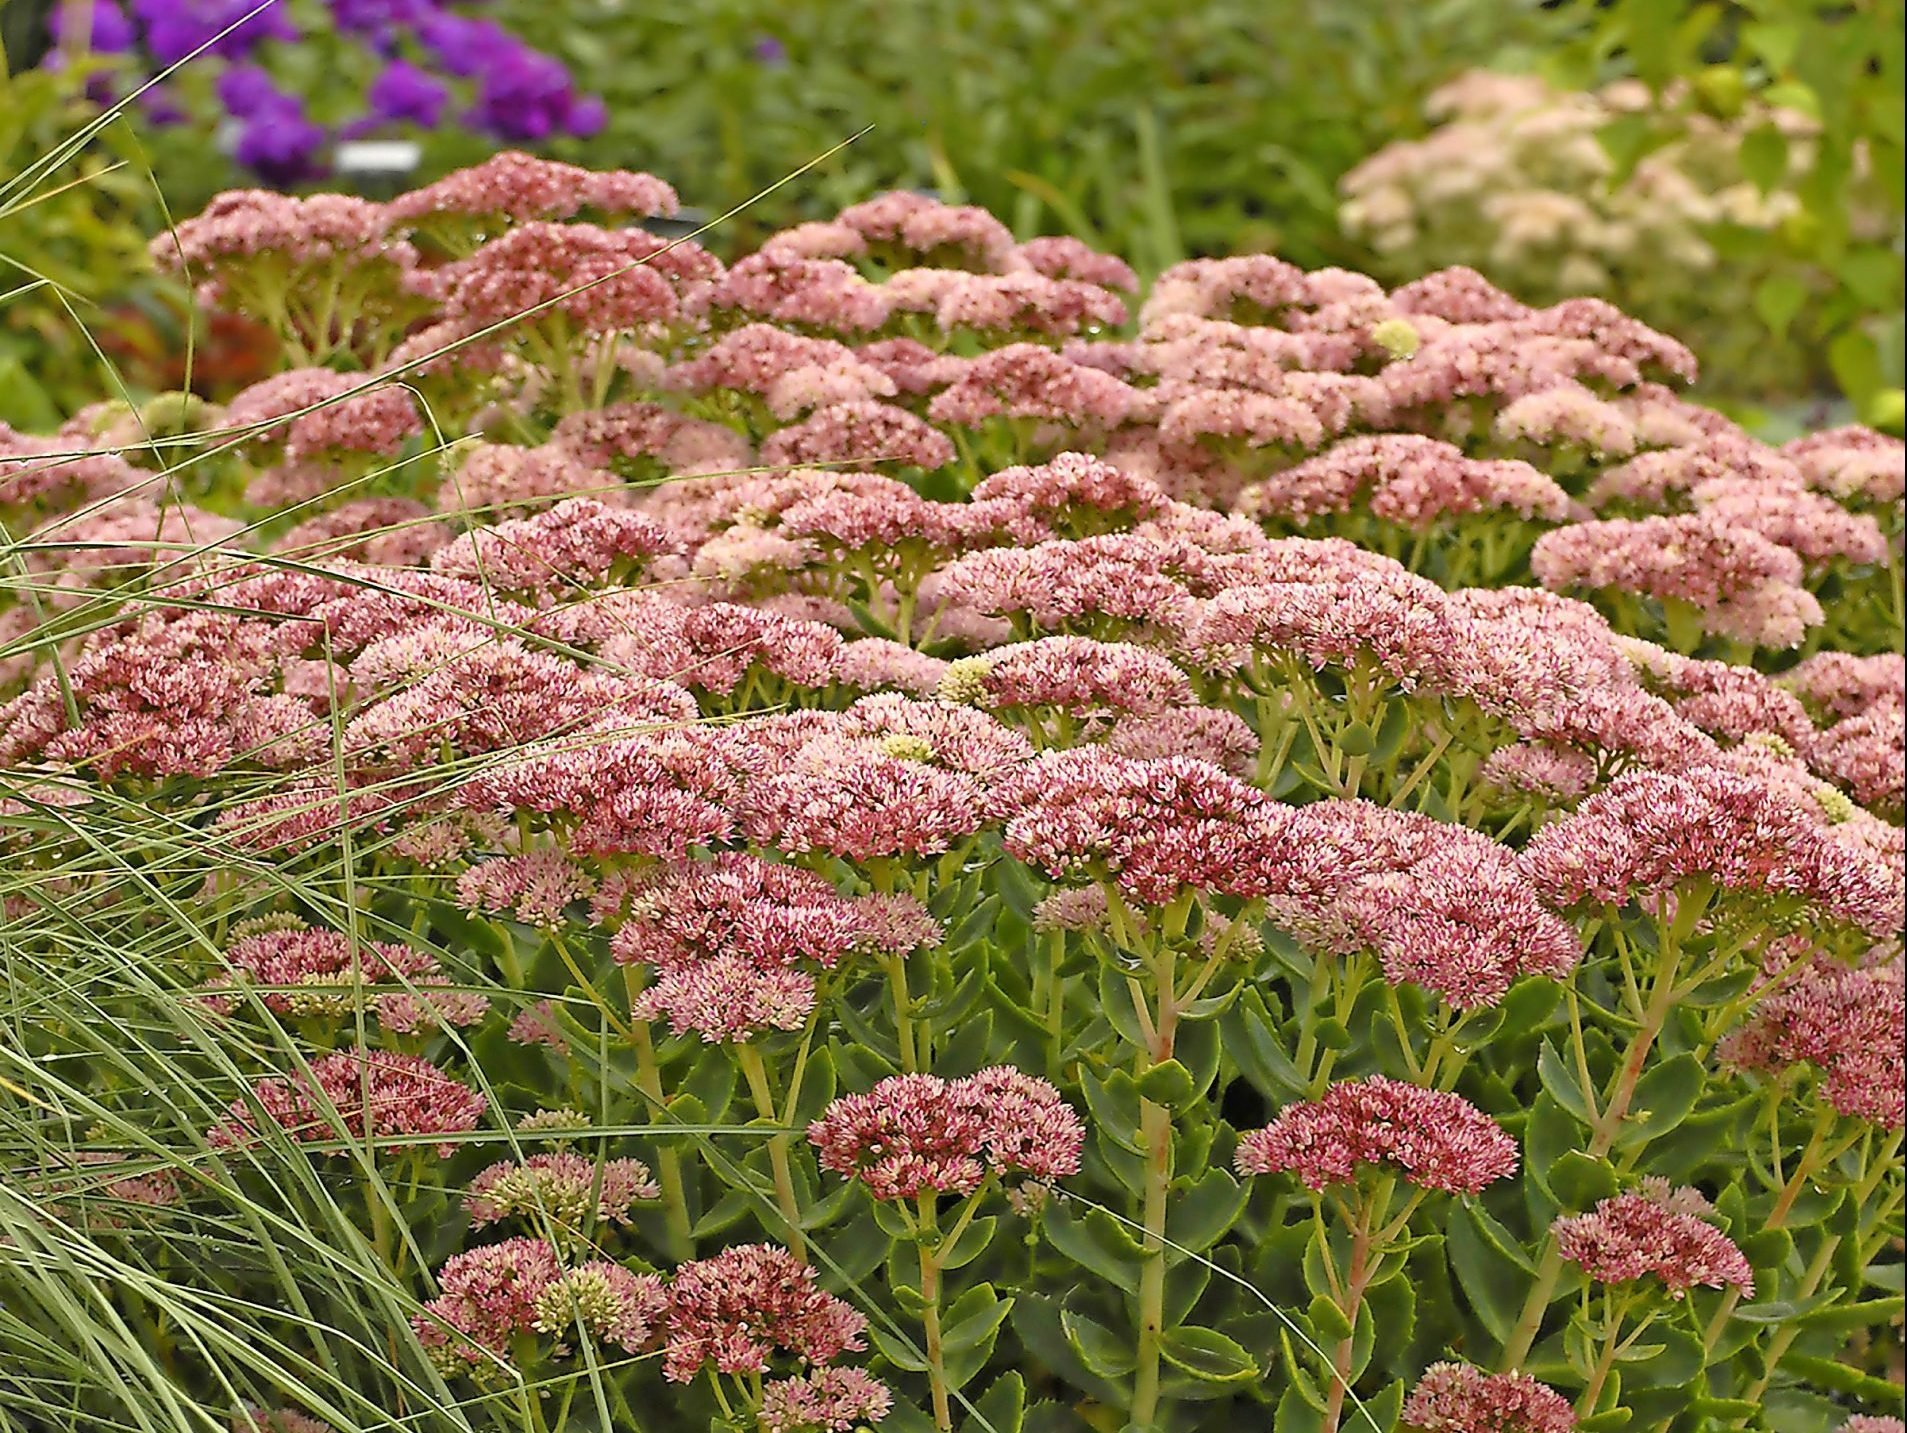 Image of Sedum plant for late summer color